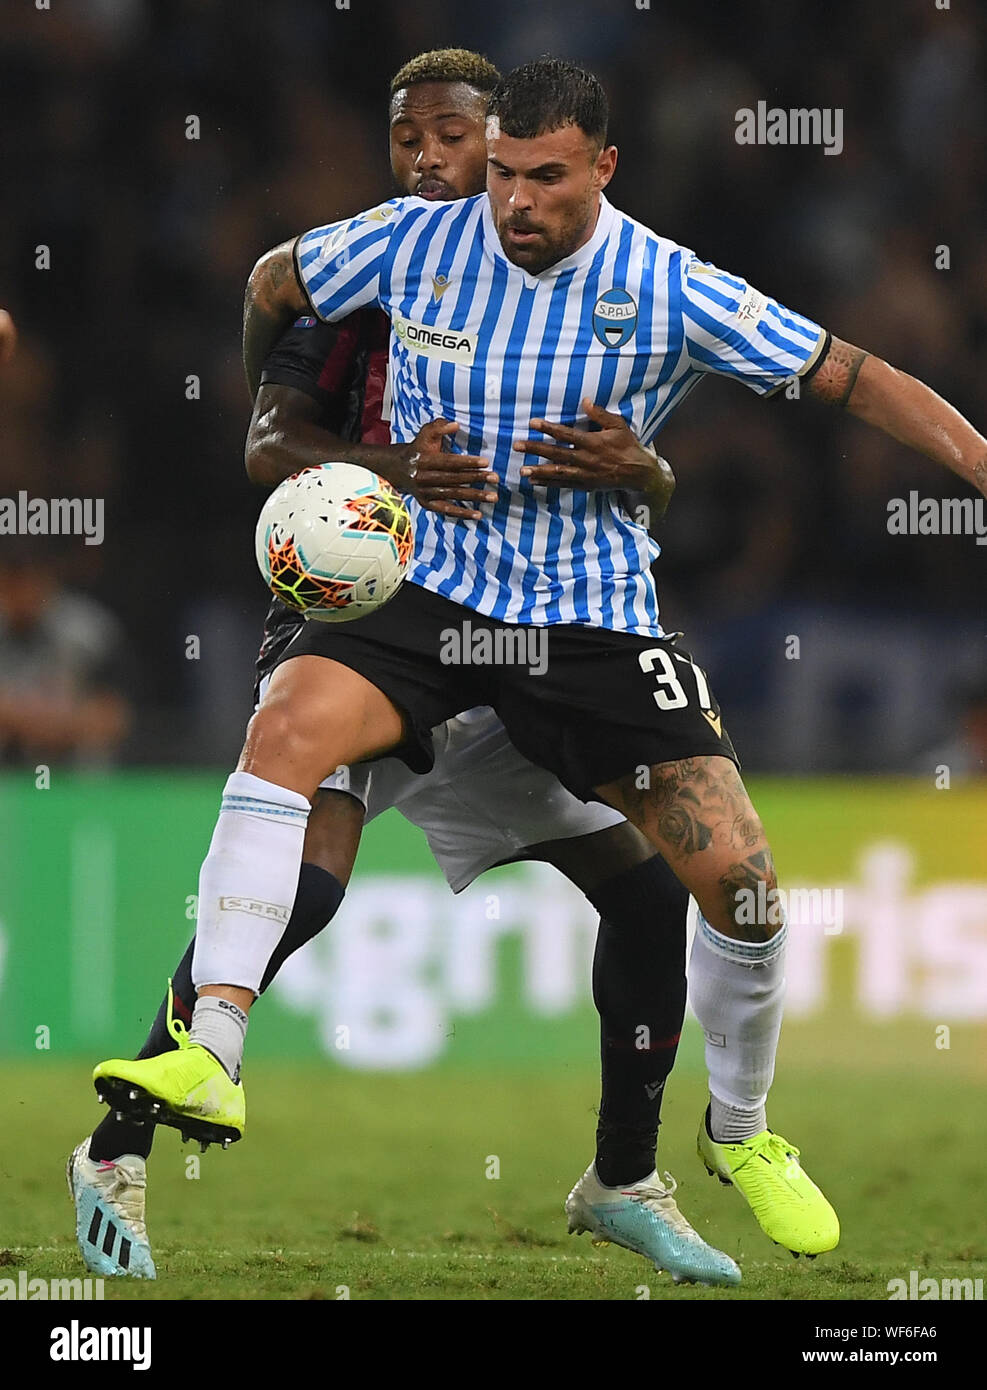 Bologna, Italy. 30th Aug, 2019. Spal's Andrea Petagna (front) vies with Bologna's Stefano Denswil during a Serie A soccer match between Bologna and Spal in Bologna, Italy, Aug 30, 2019. Credit: Alberto Lingria/Xinhua Credit: Xinhua/Alamy Live News Stock Photo